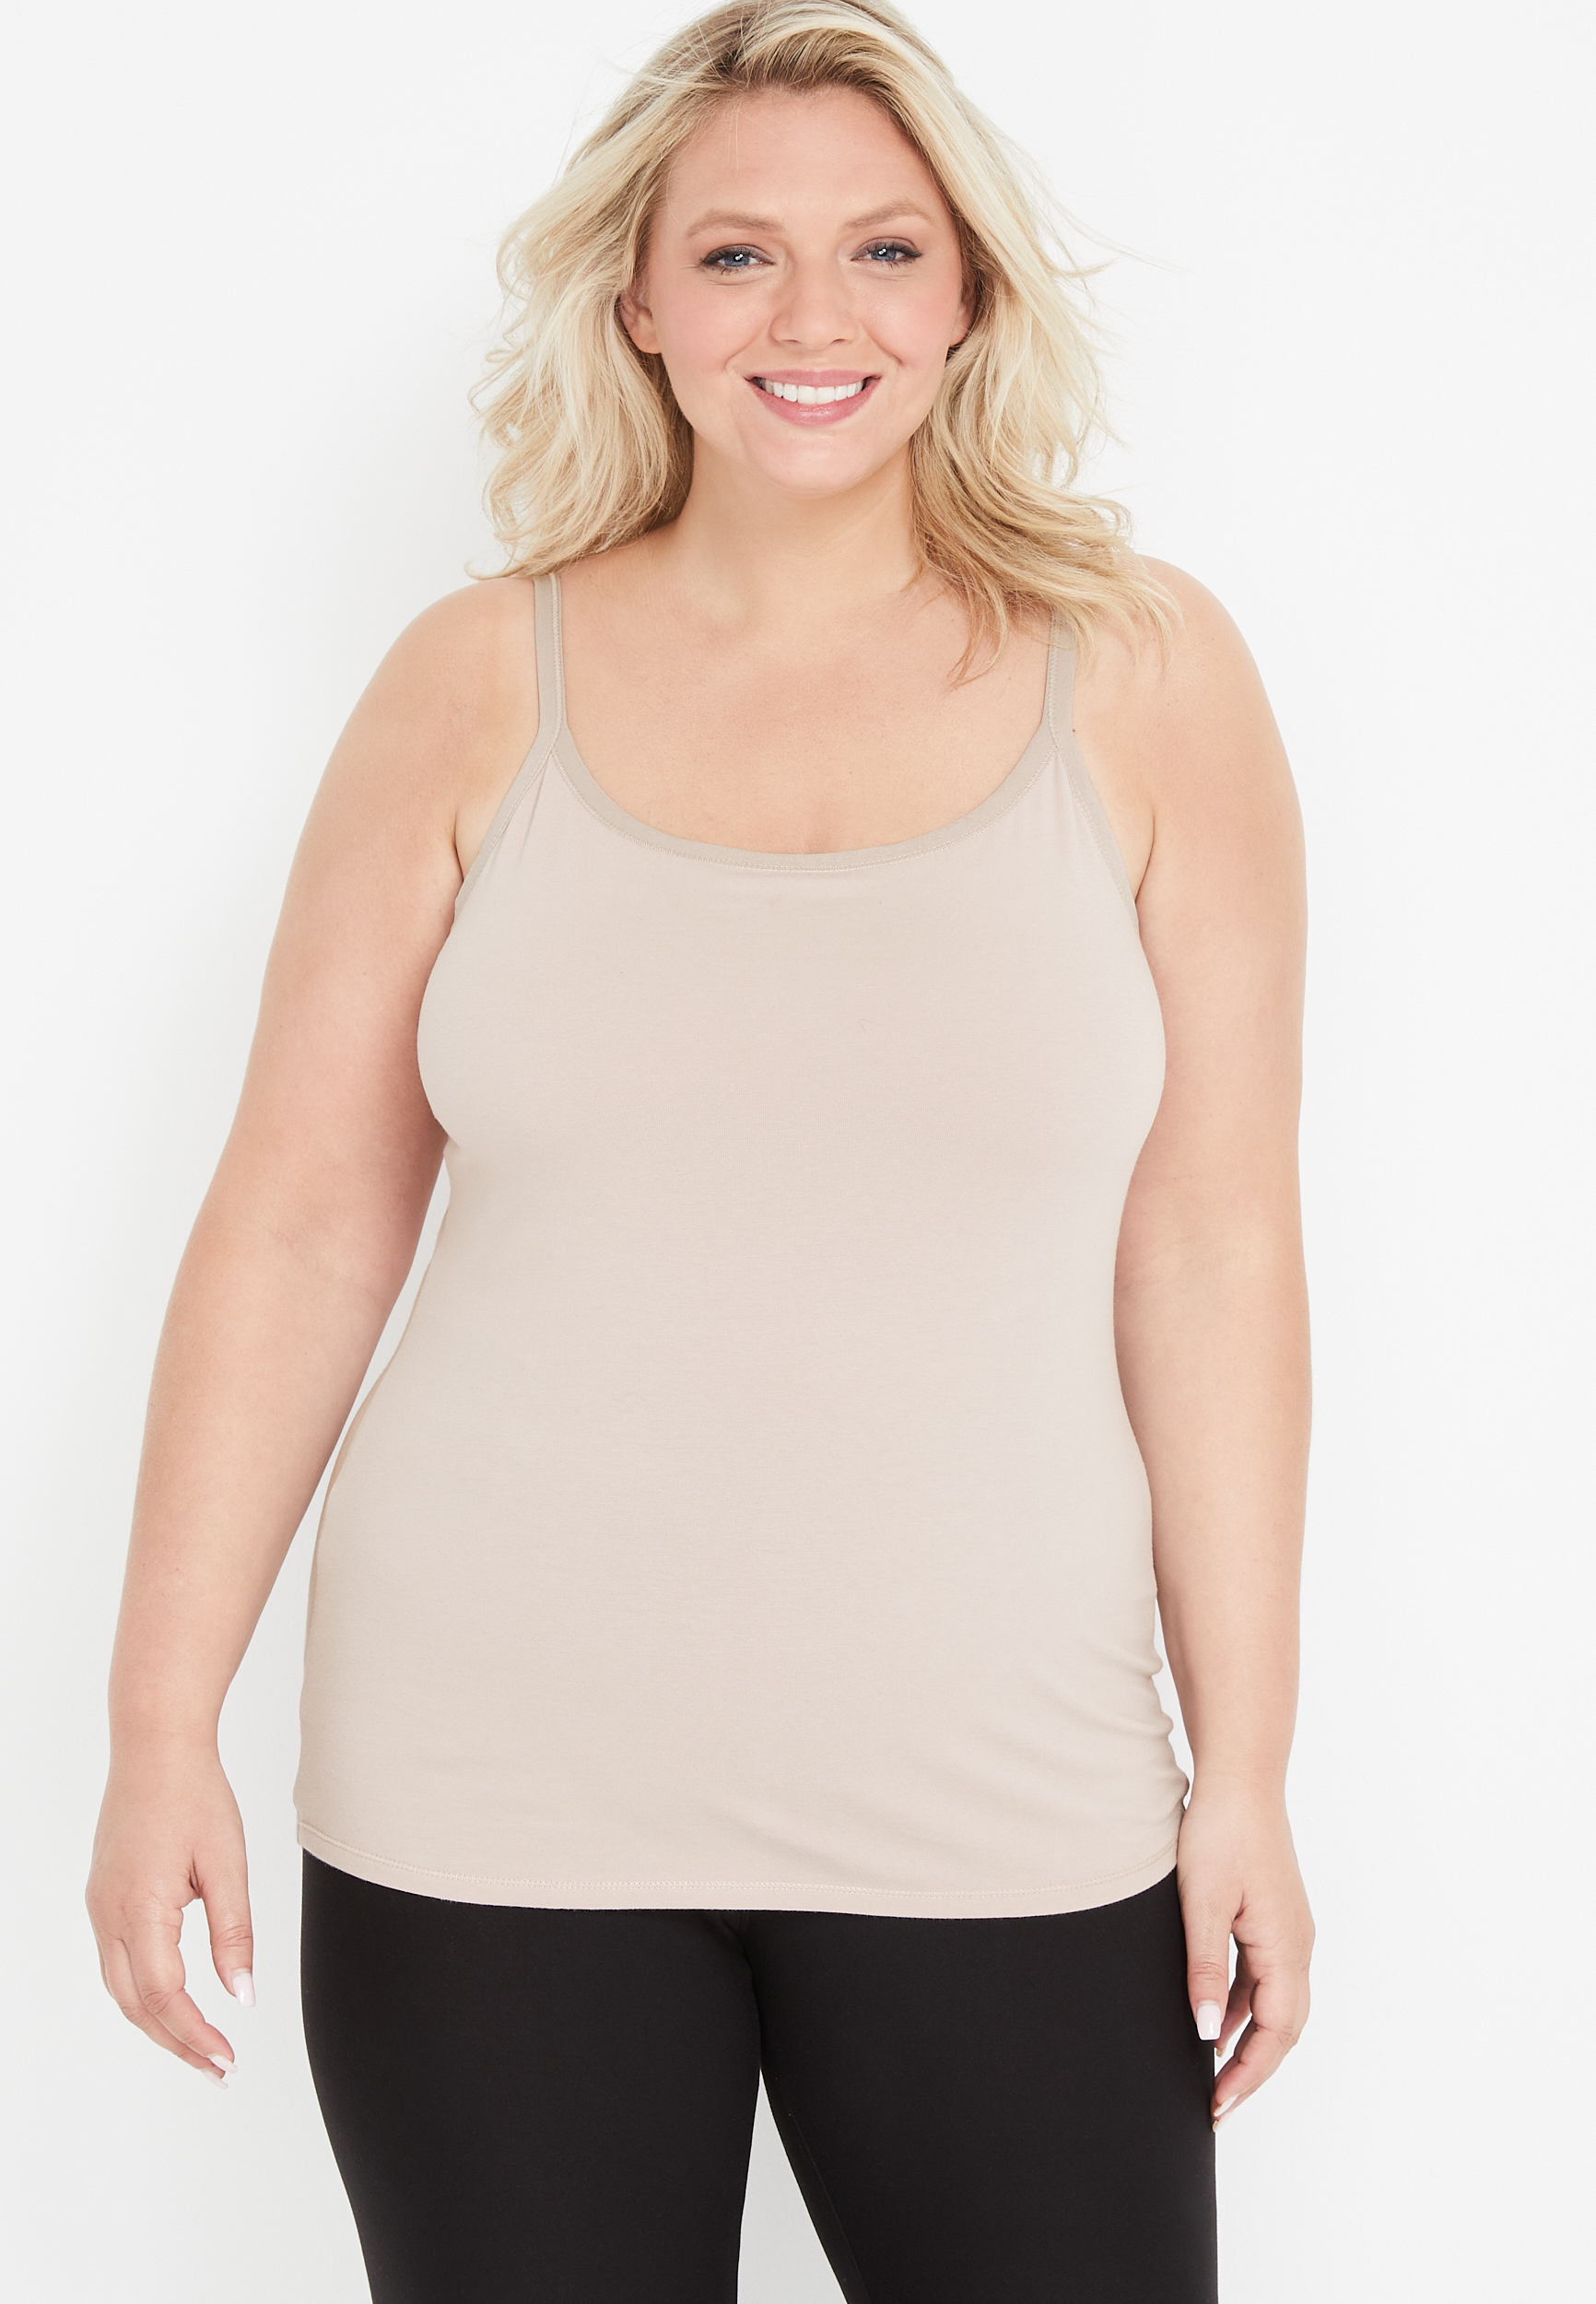 Camisoles with Built-in Bra for Large Breasts